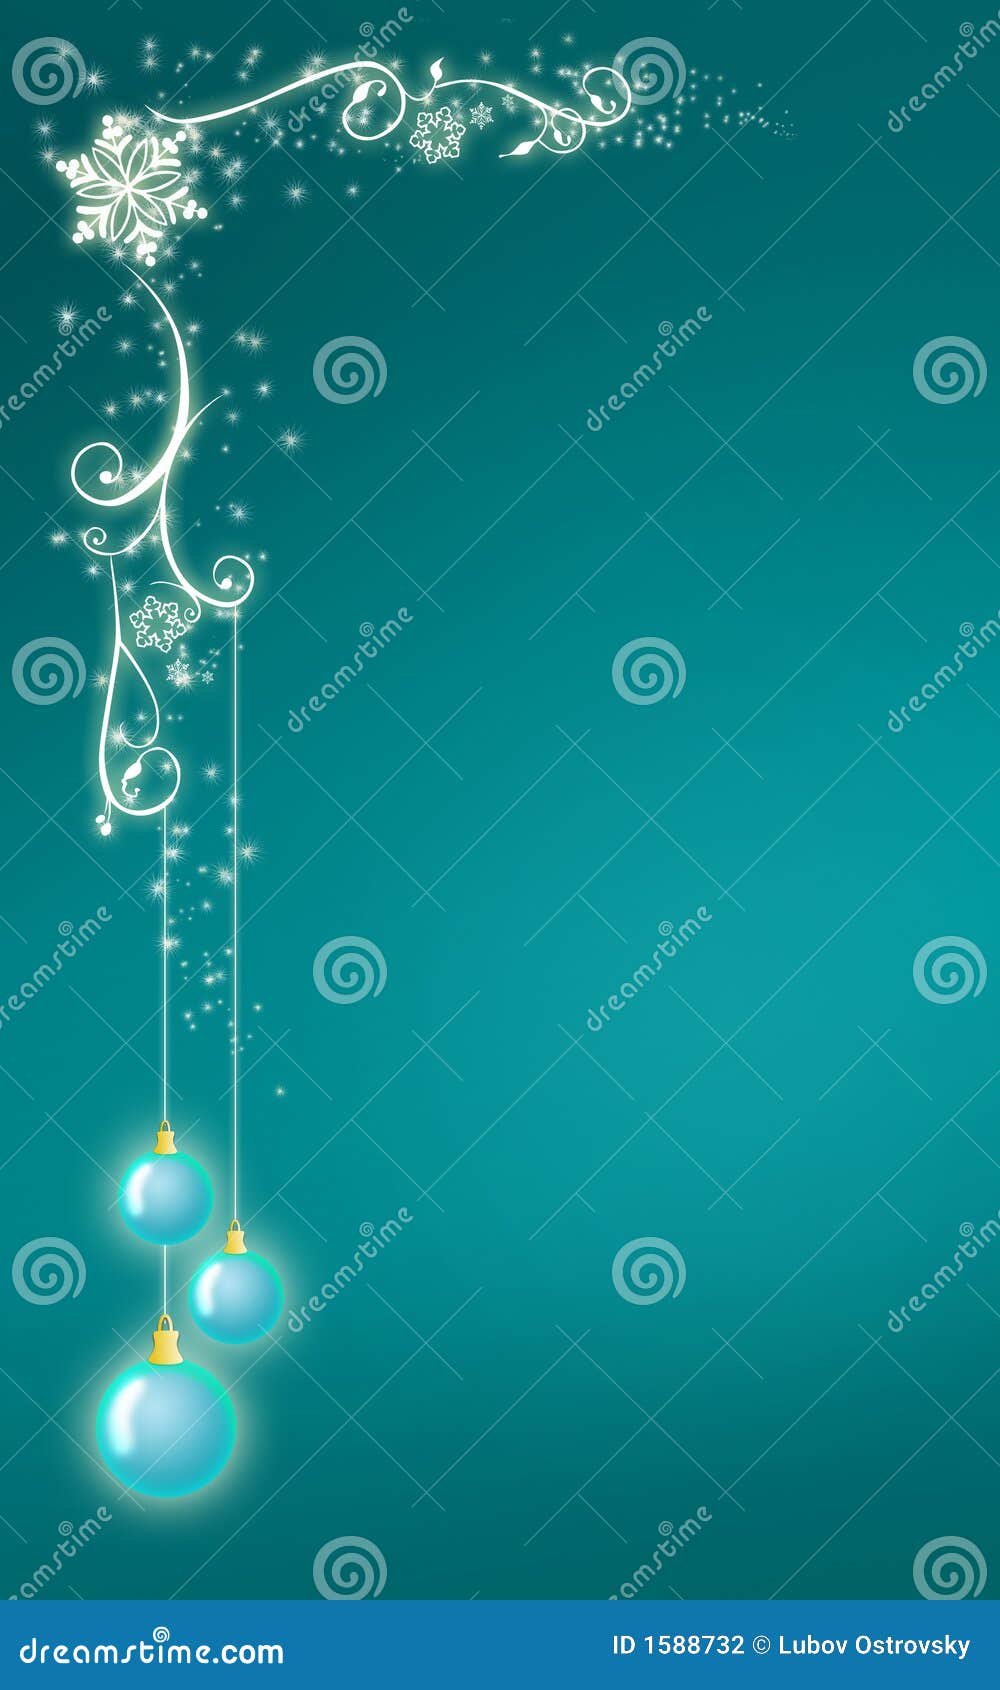 Greeting Card Design Christmas Style Stock Photography - Image: 1588732